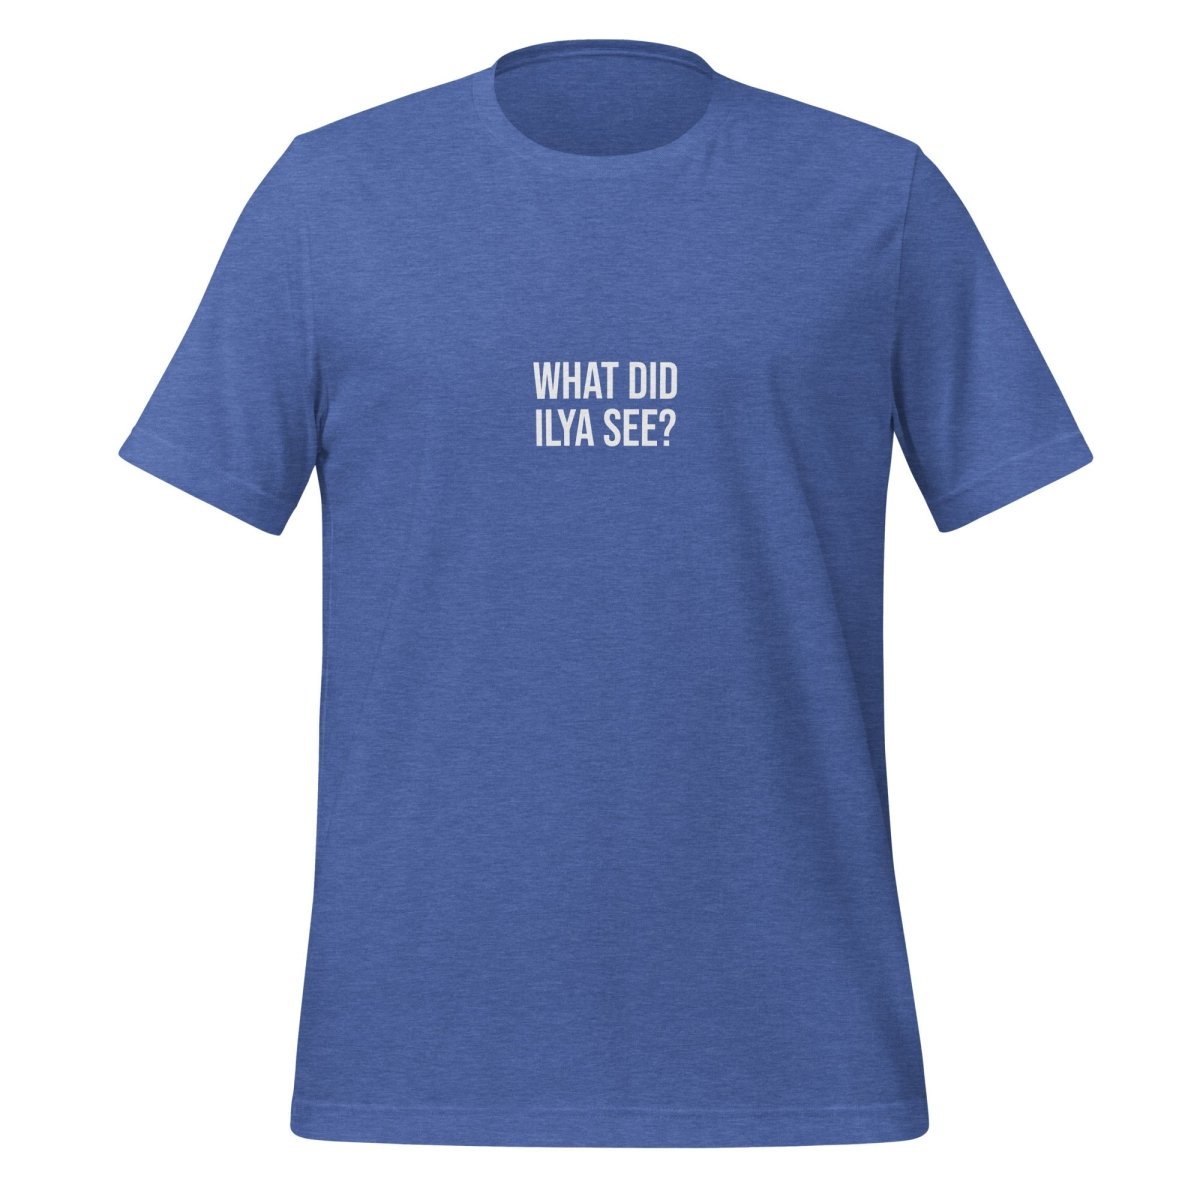 WHAT DID ILYA SEE? T - Shirt 4 (unisex) - Heather True Royal - AI Store